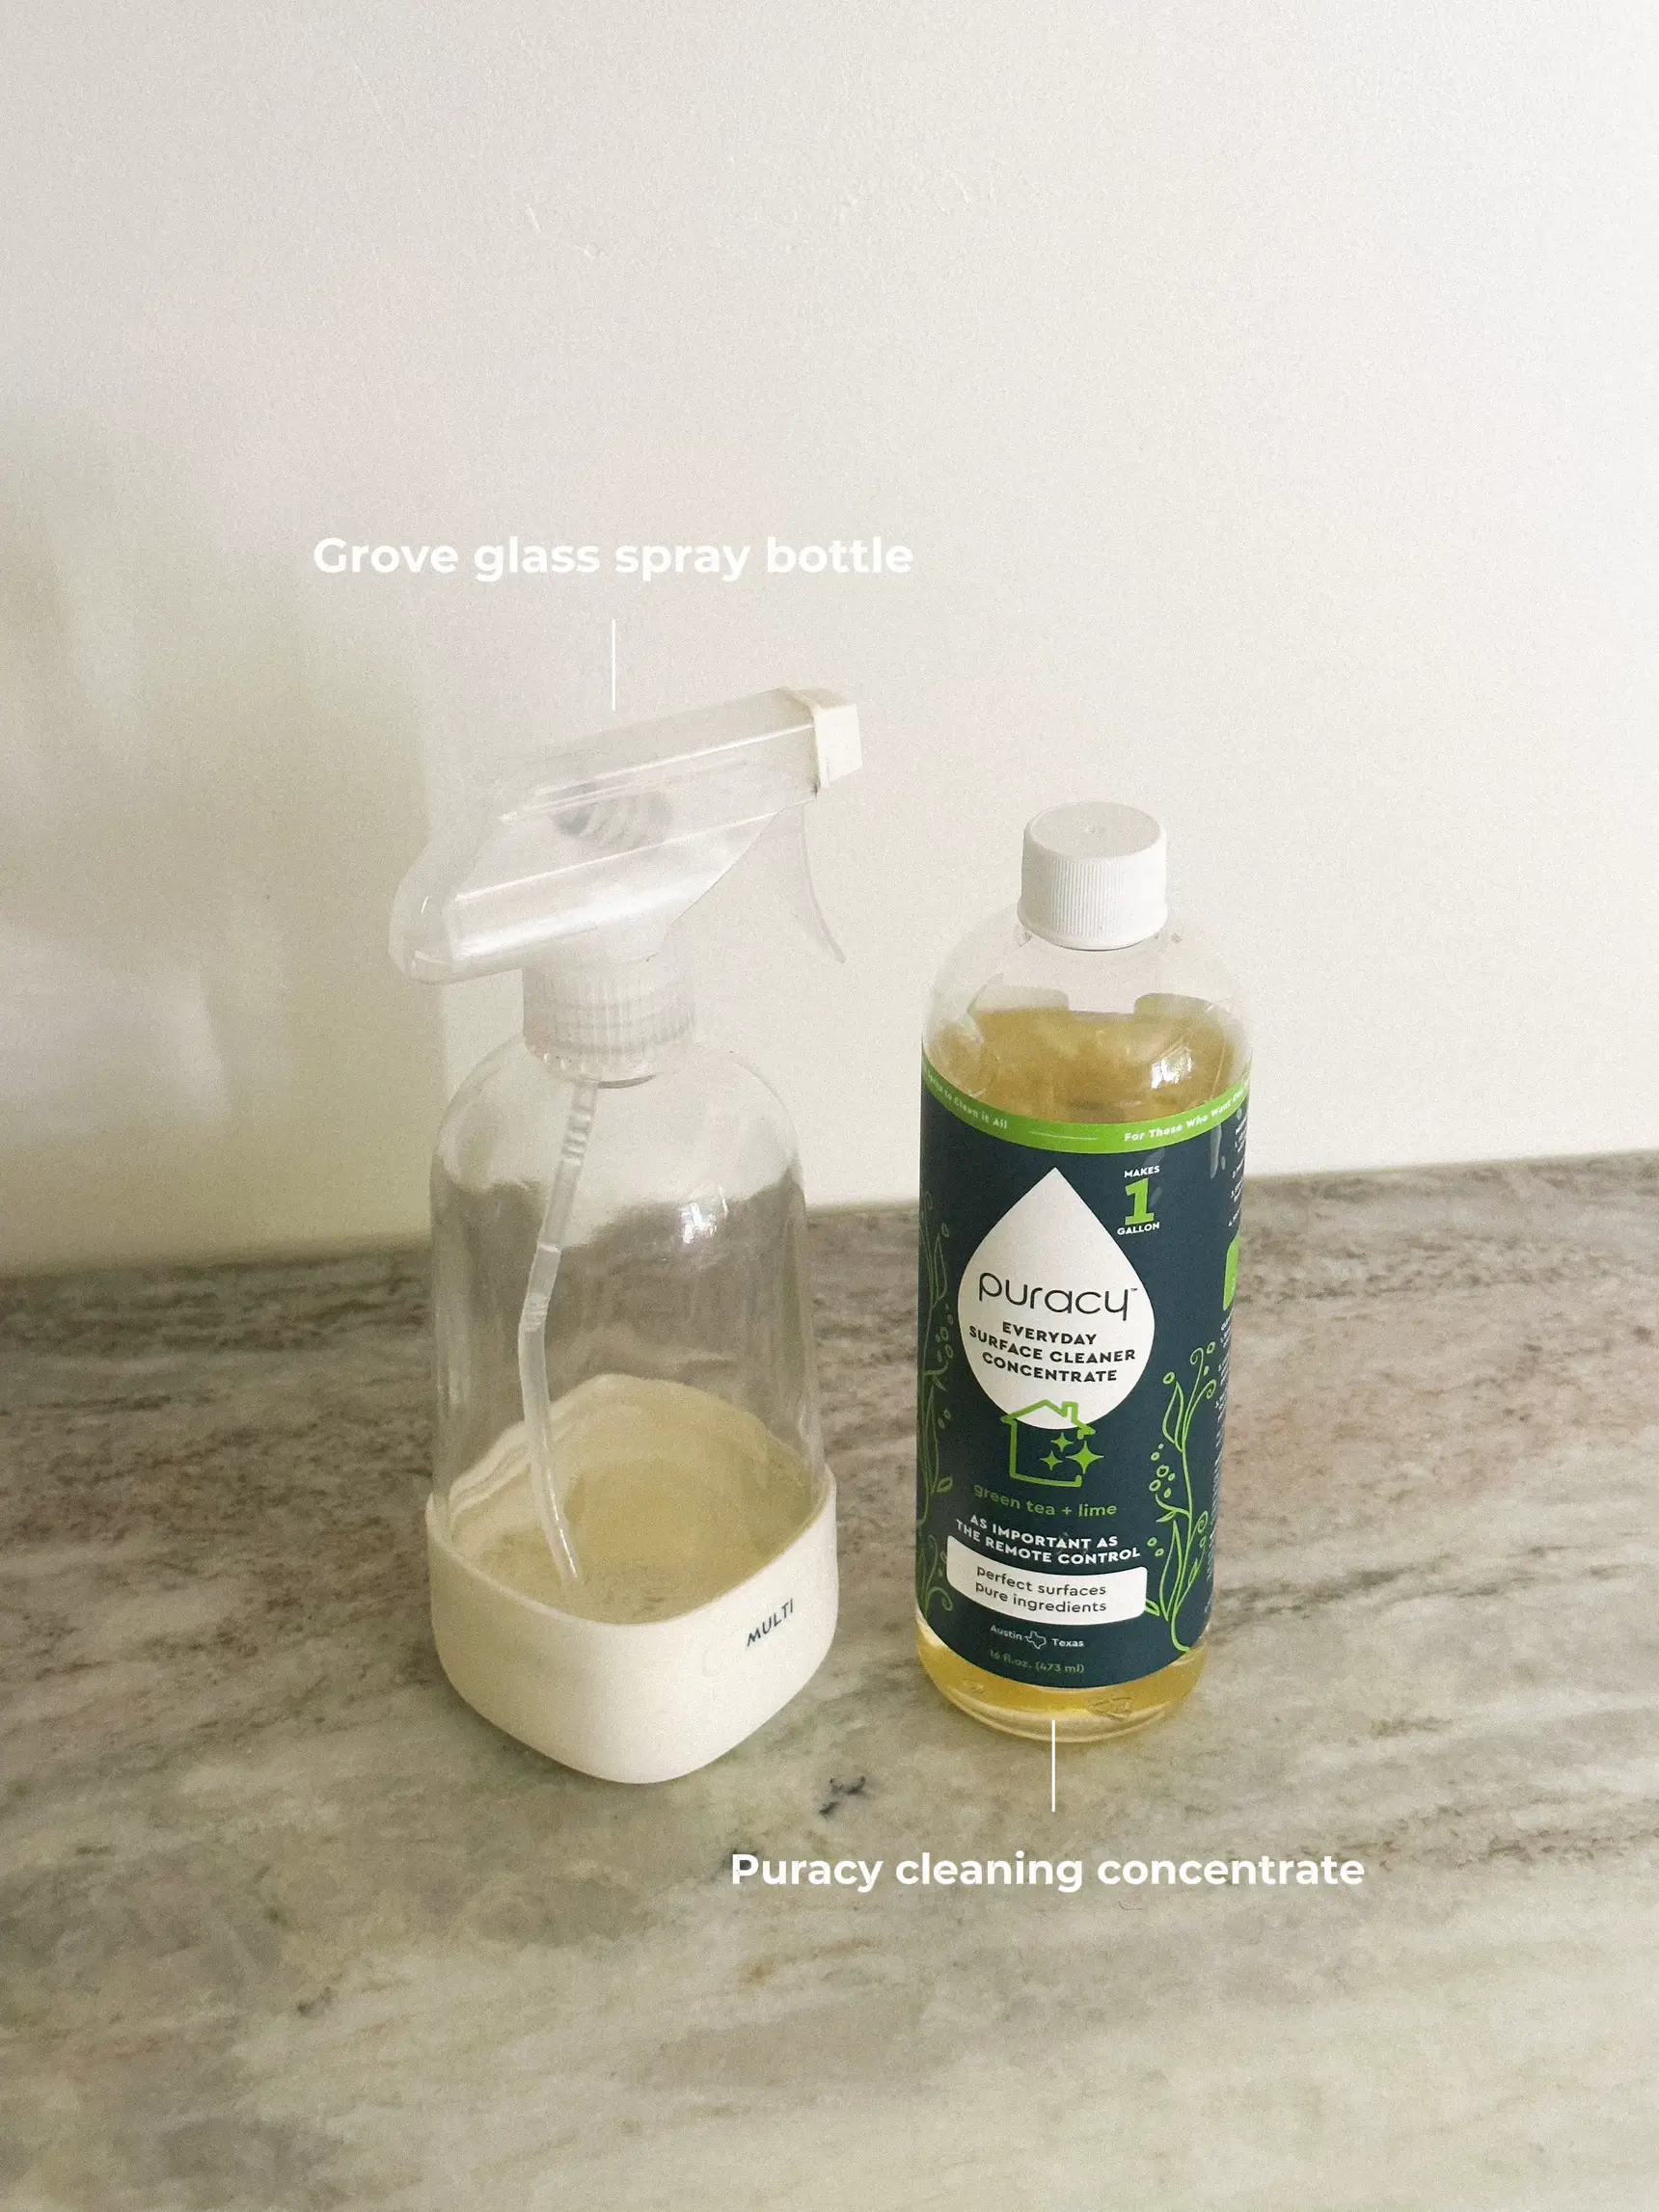 Puracy Green Tea & Lime Clean Can Surface Cleaner Starter Set